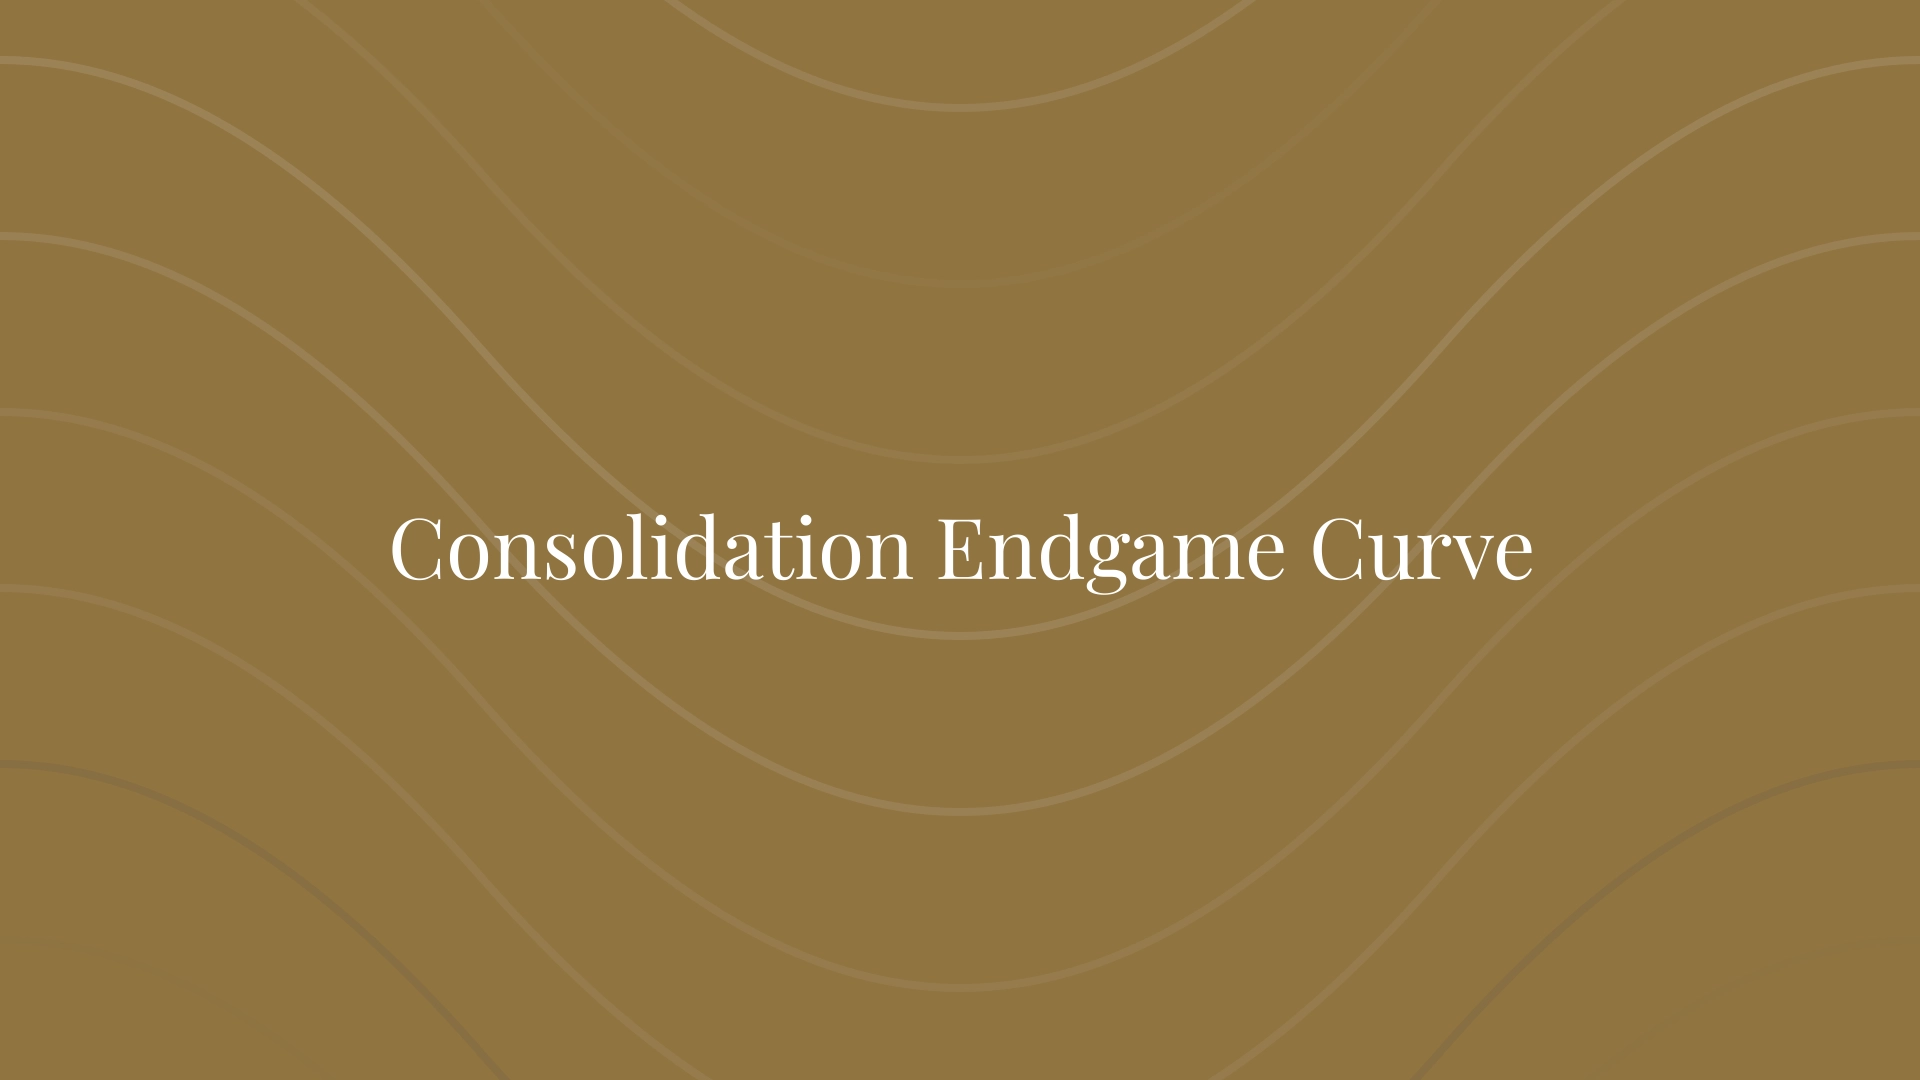 Consolidation Endgame Curve